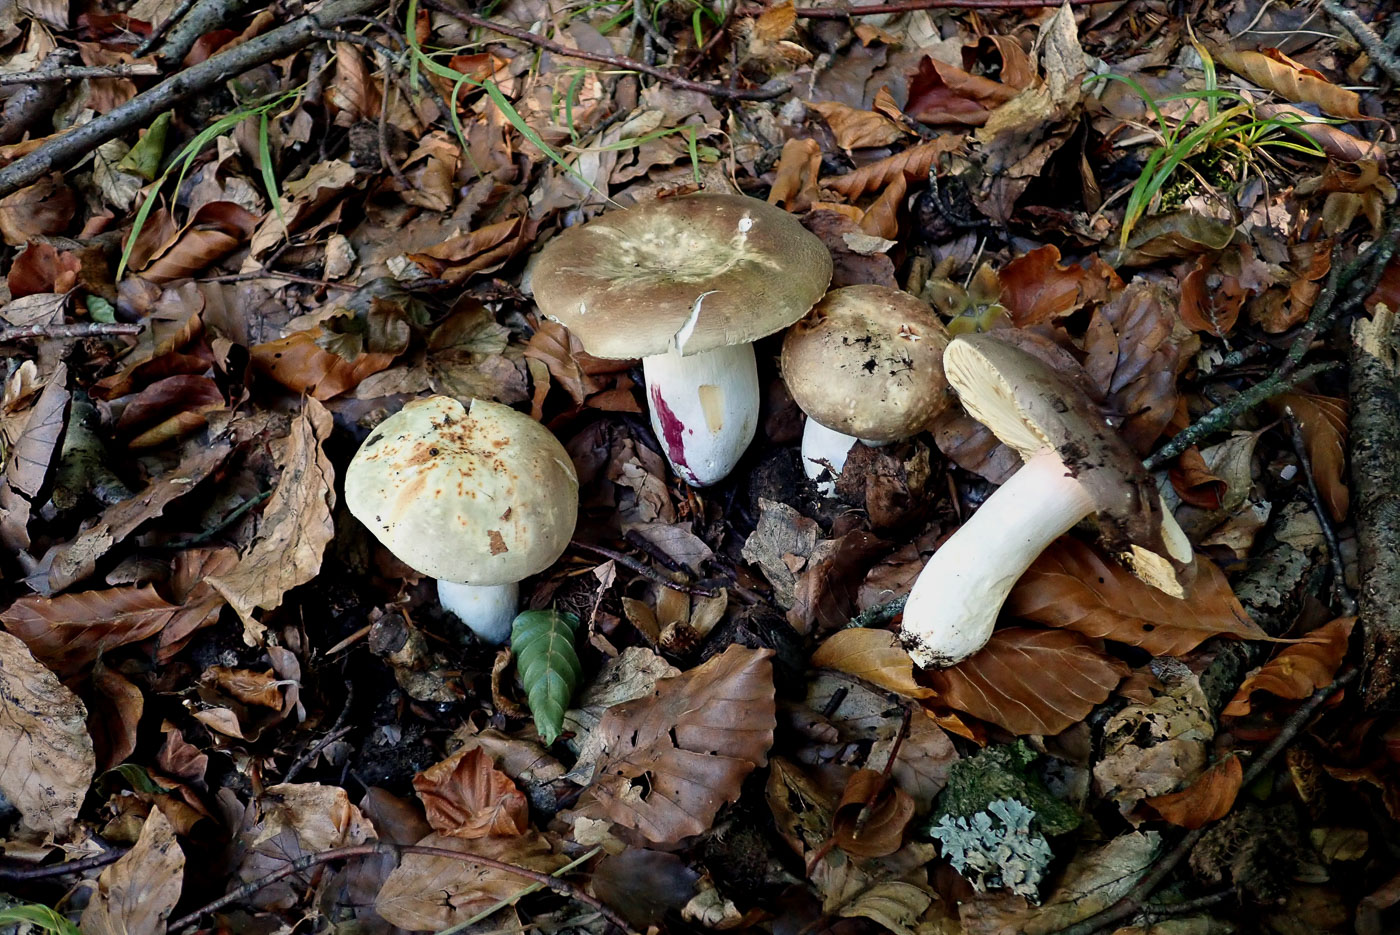 Russula olivacea   by Penny Cullington